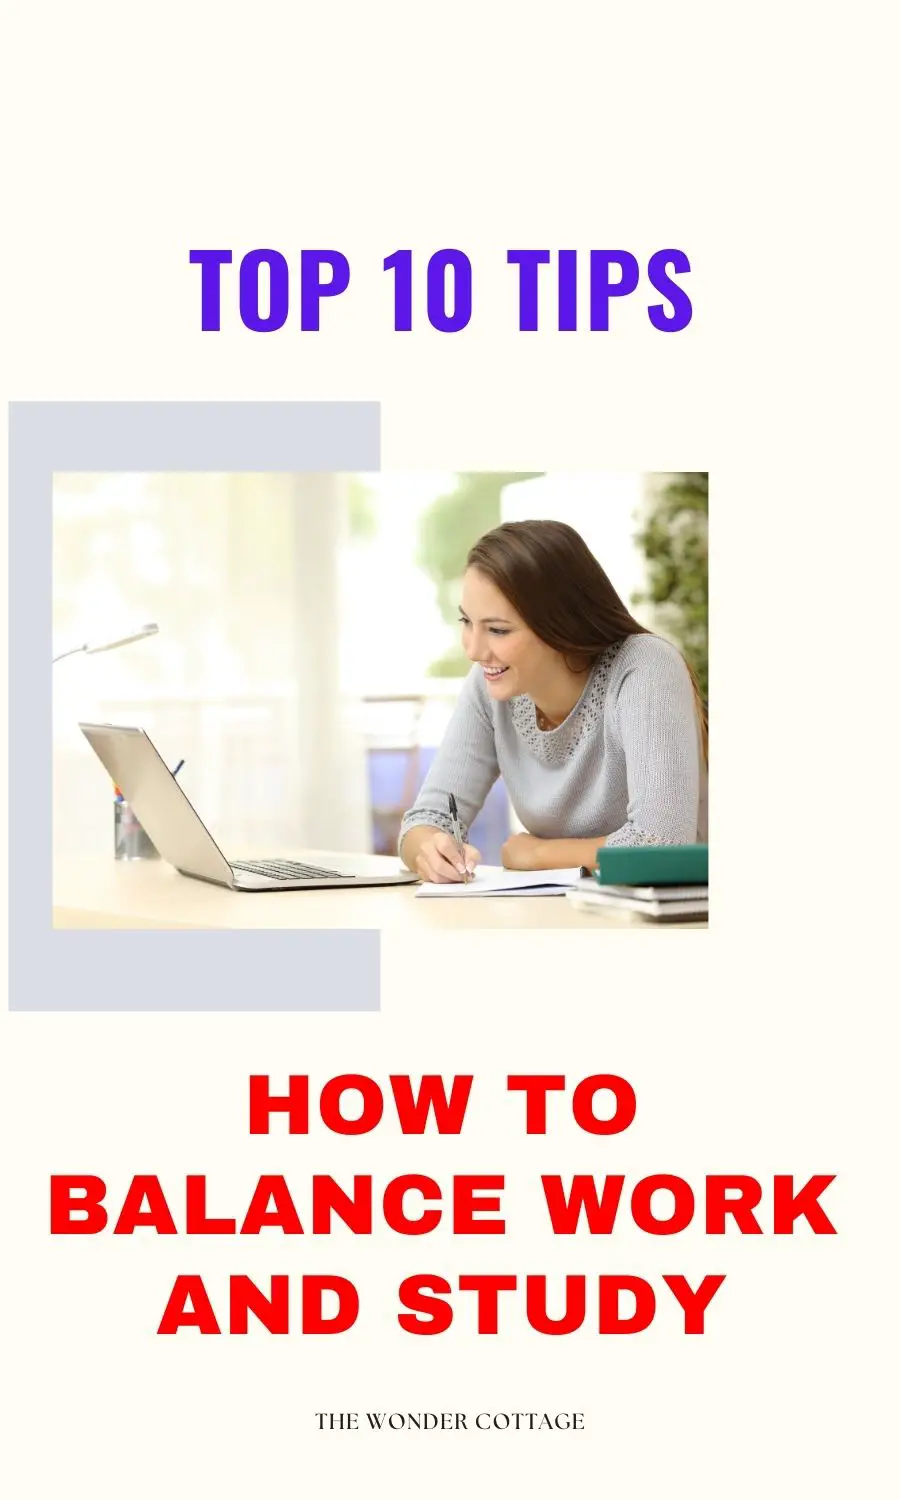 Top 10 Tips For How To Balance Work and Study